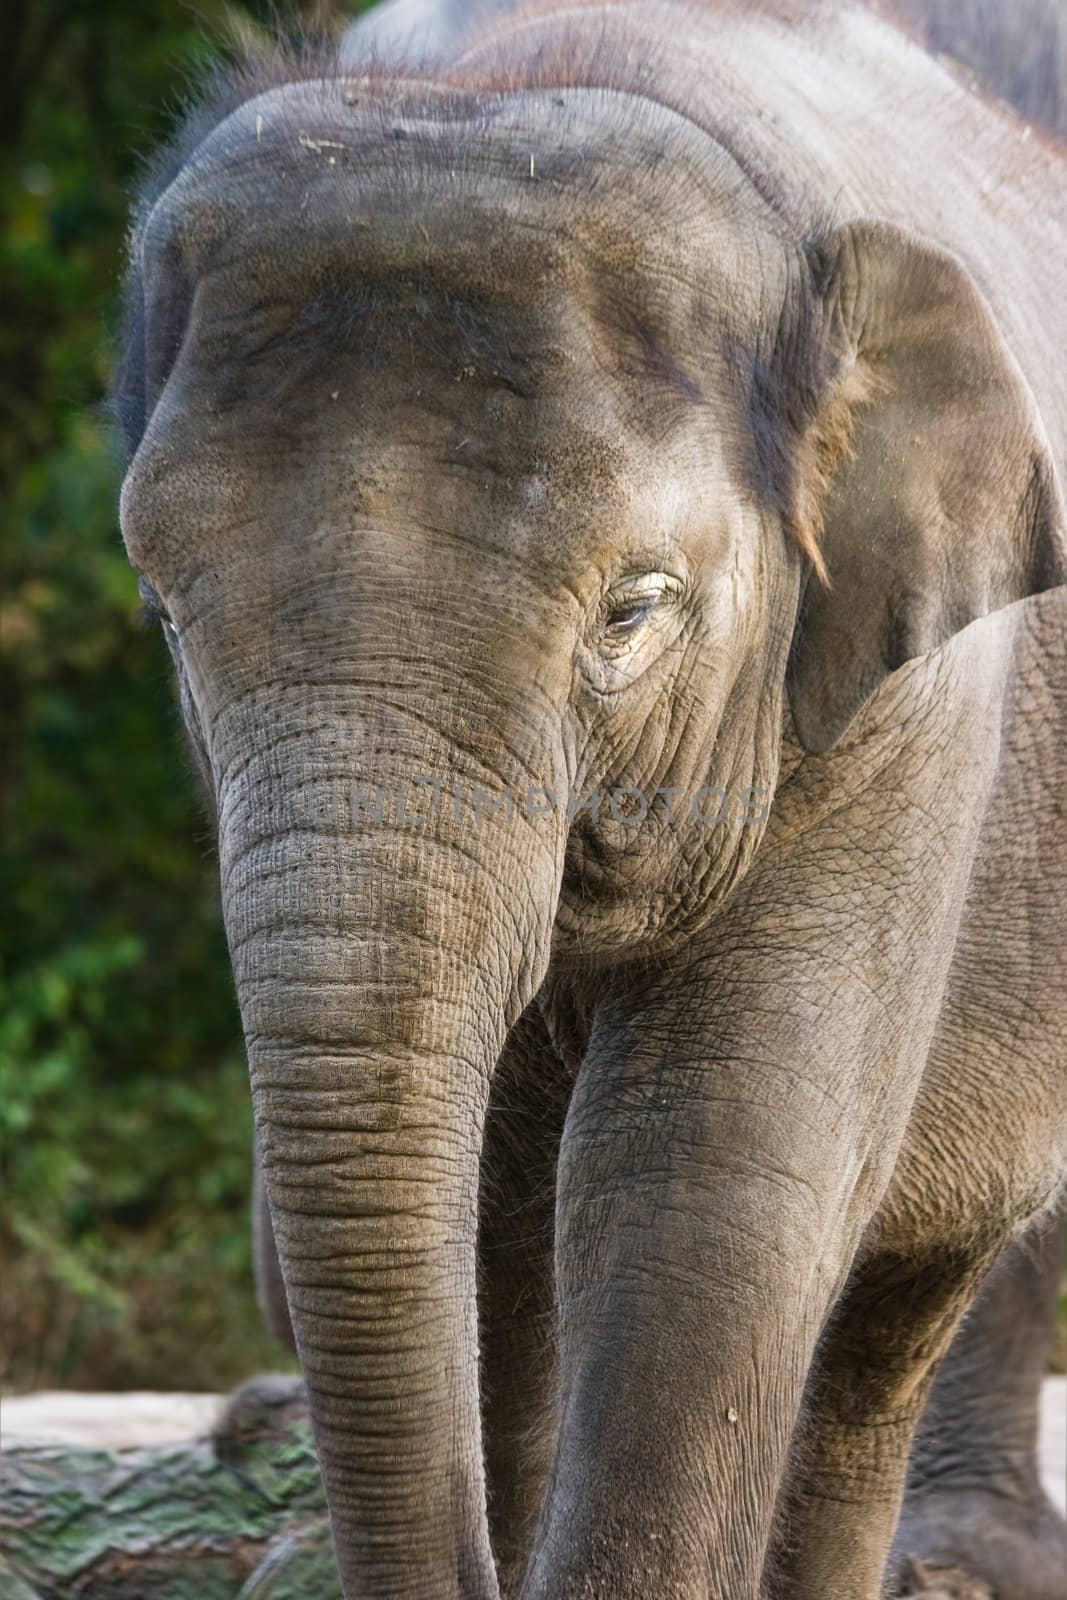 Huge female asian elephant in close view - vertical image